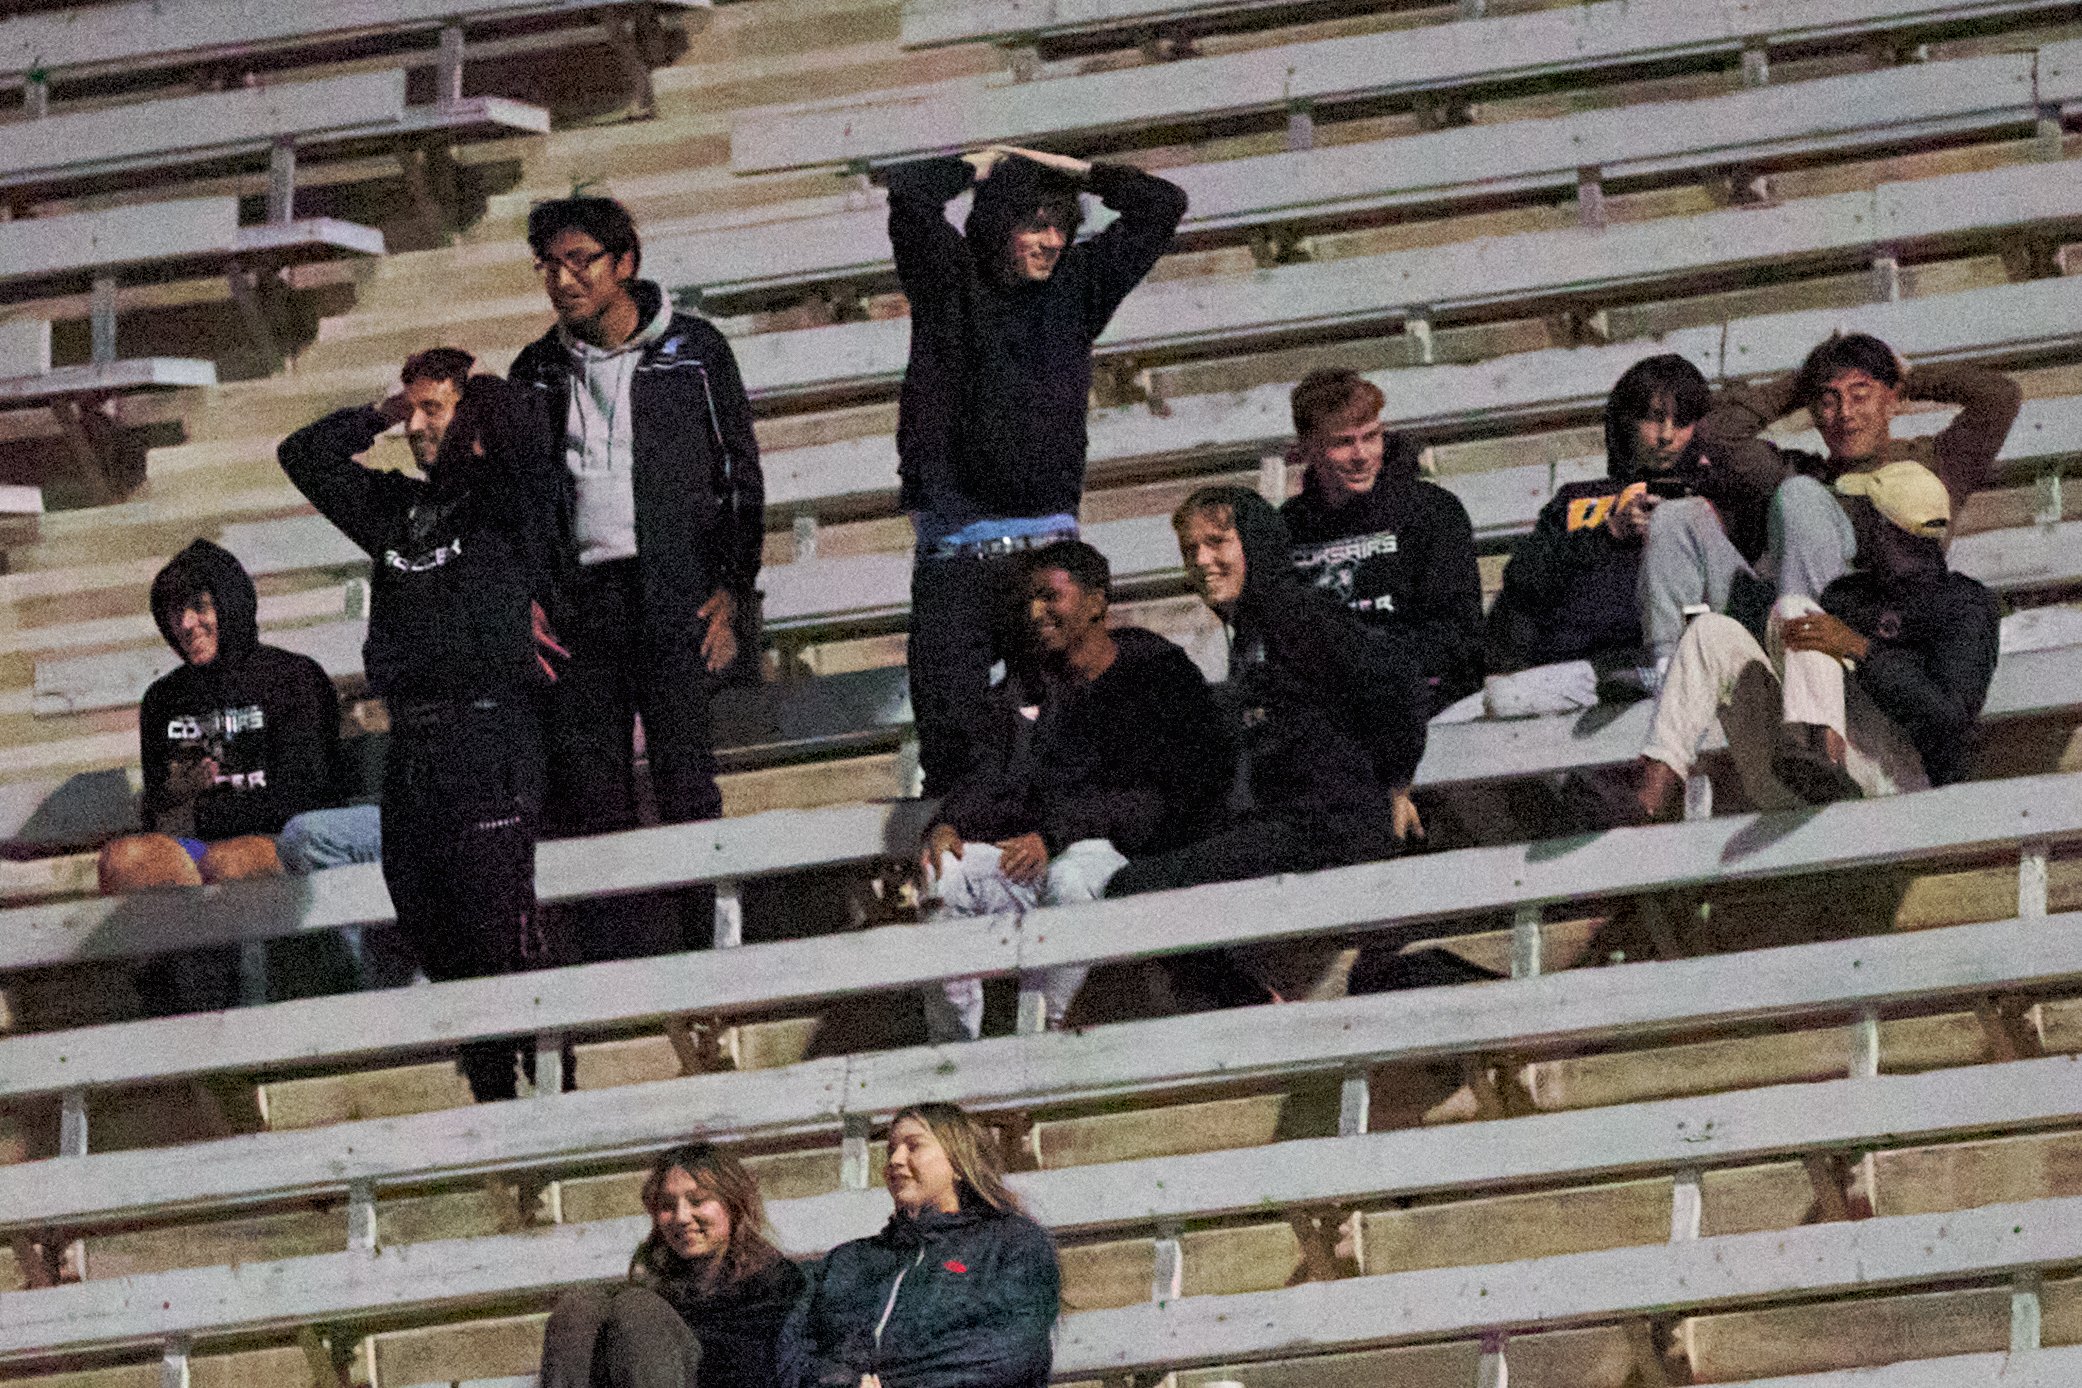  Members of the Santa Monica College Corsairs Men's Soccer team watch the game in support of the women's team during the match against the Bakersfield College Renegades on Wednesday, Nov. 16, 2022, at Corsair Field in Santa Monica, Calif. The Corsair